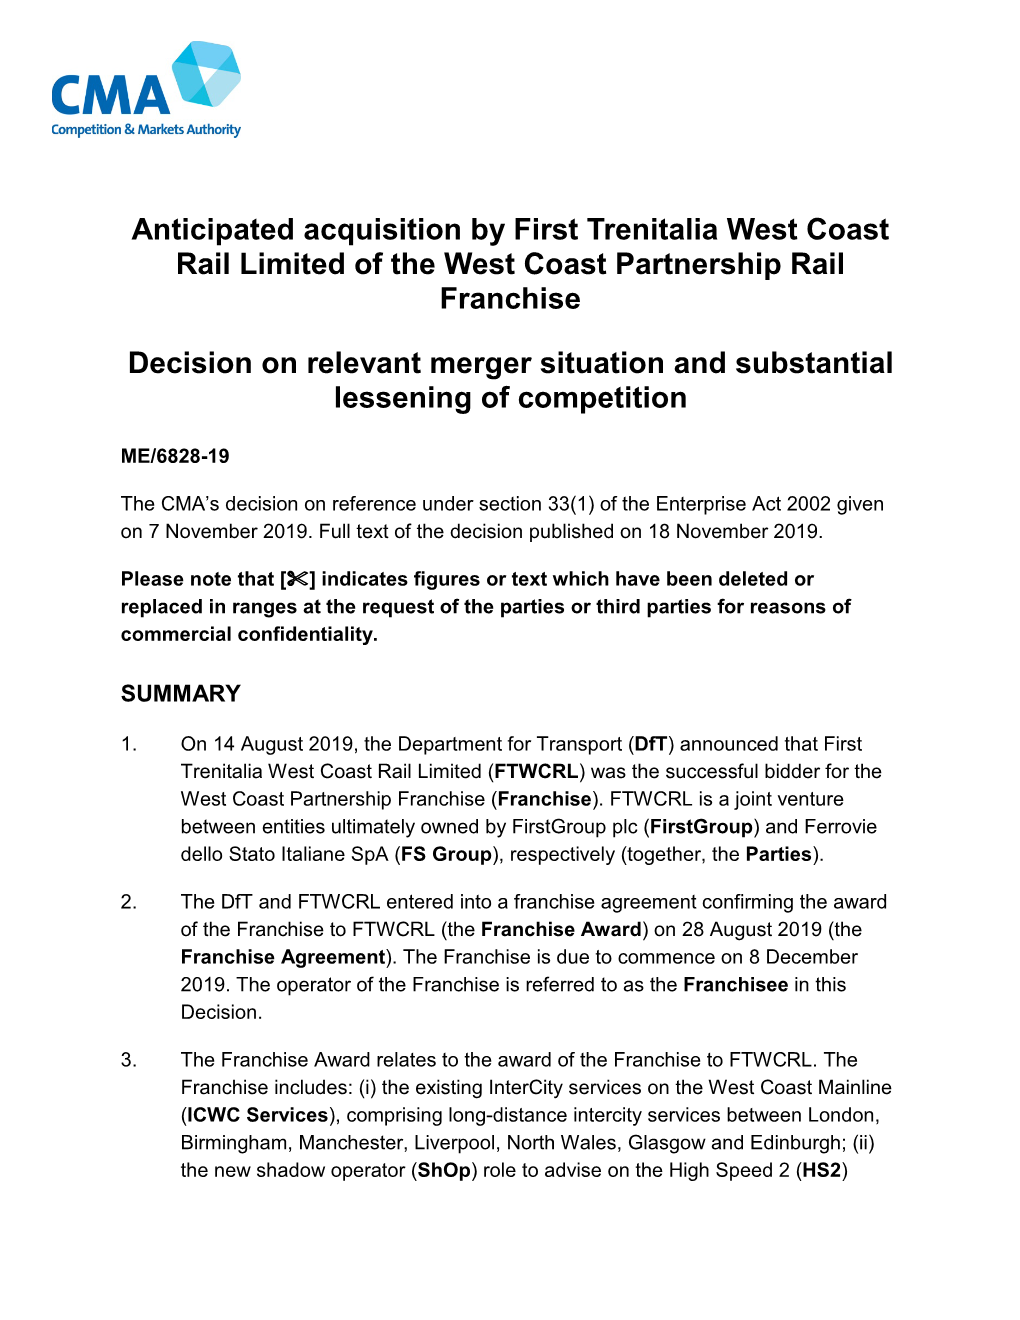 Full Text of the Decision Published on 18 November 2019